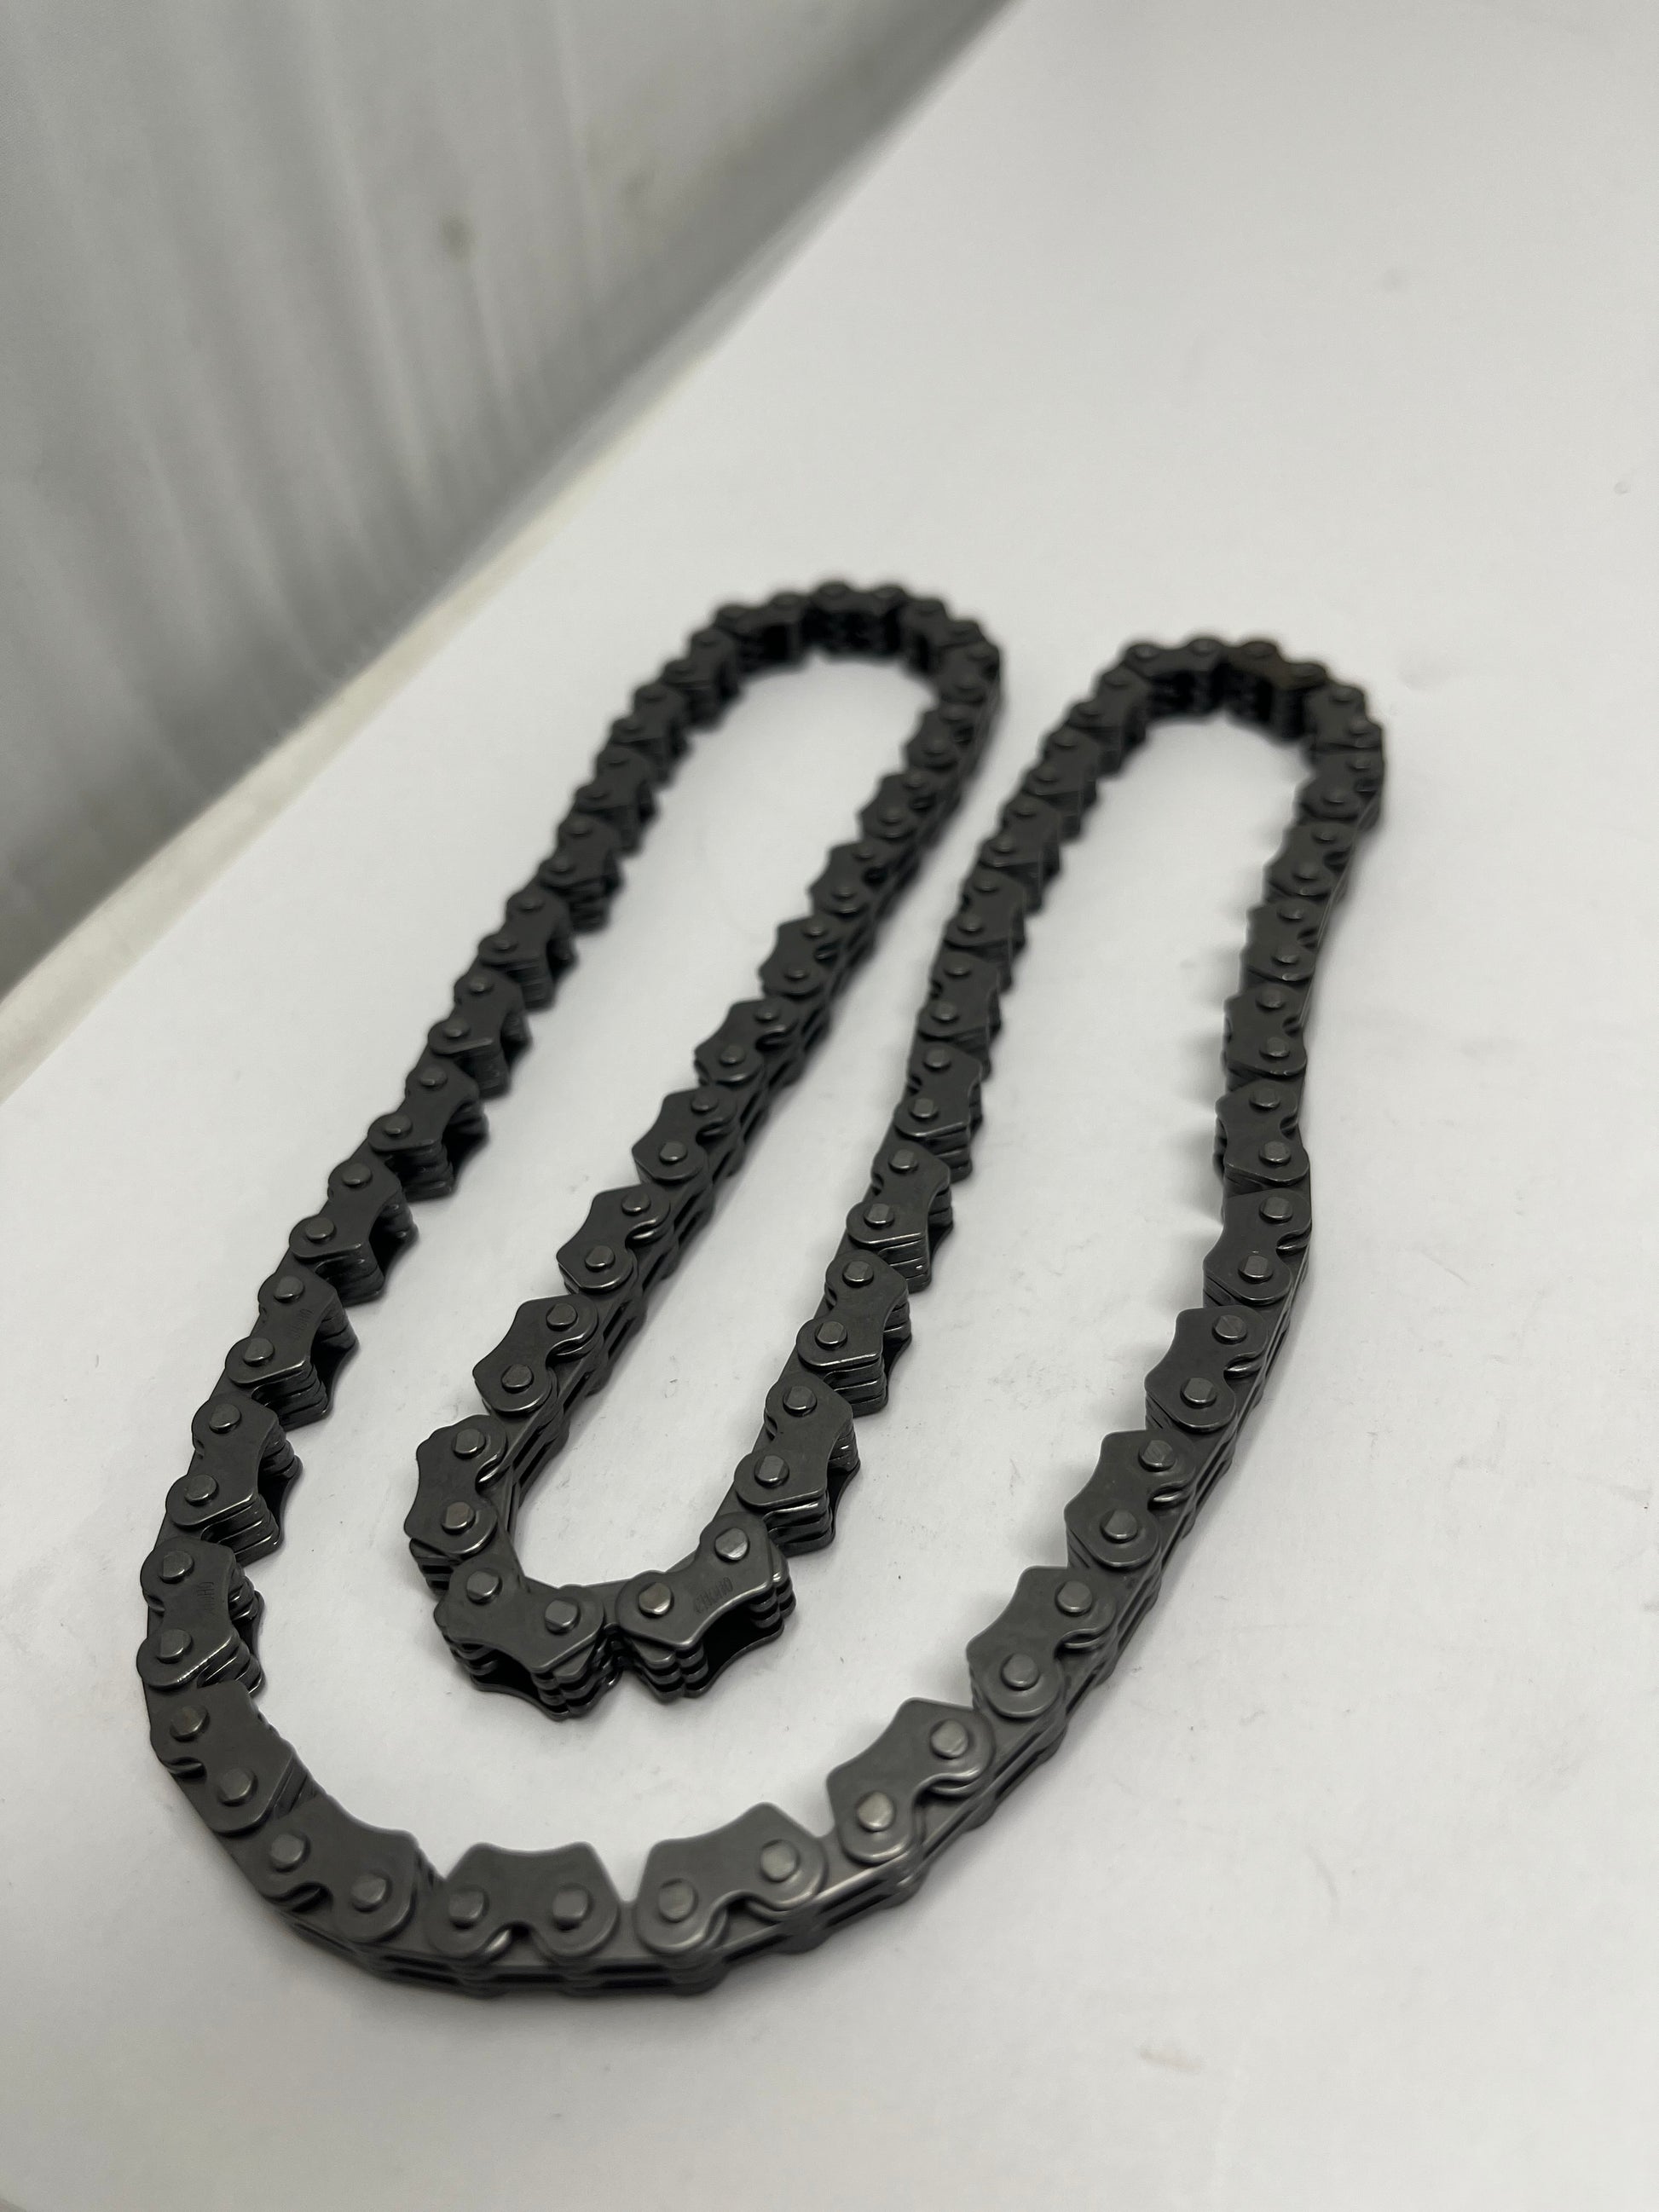 RTS 250cc chain for sale. Dongfang 250cc chain part